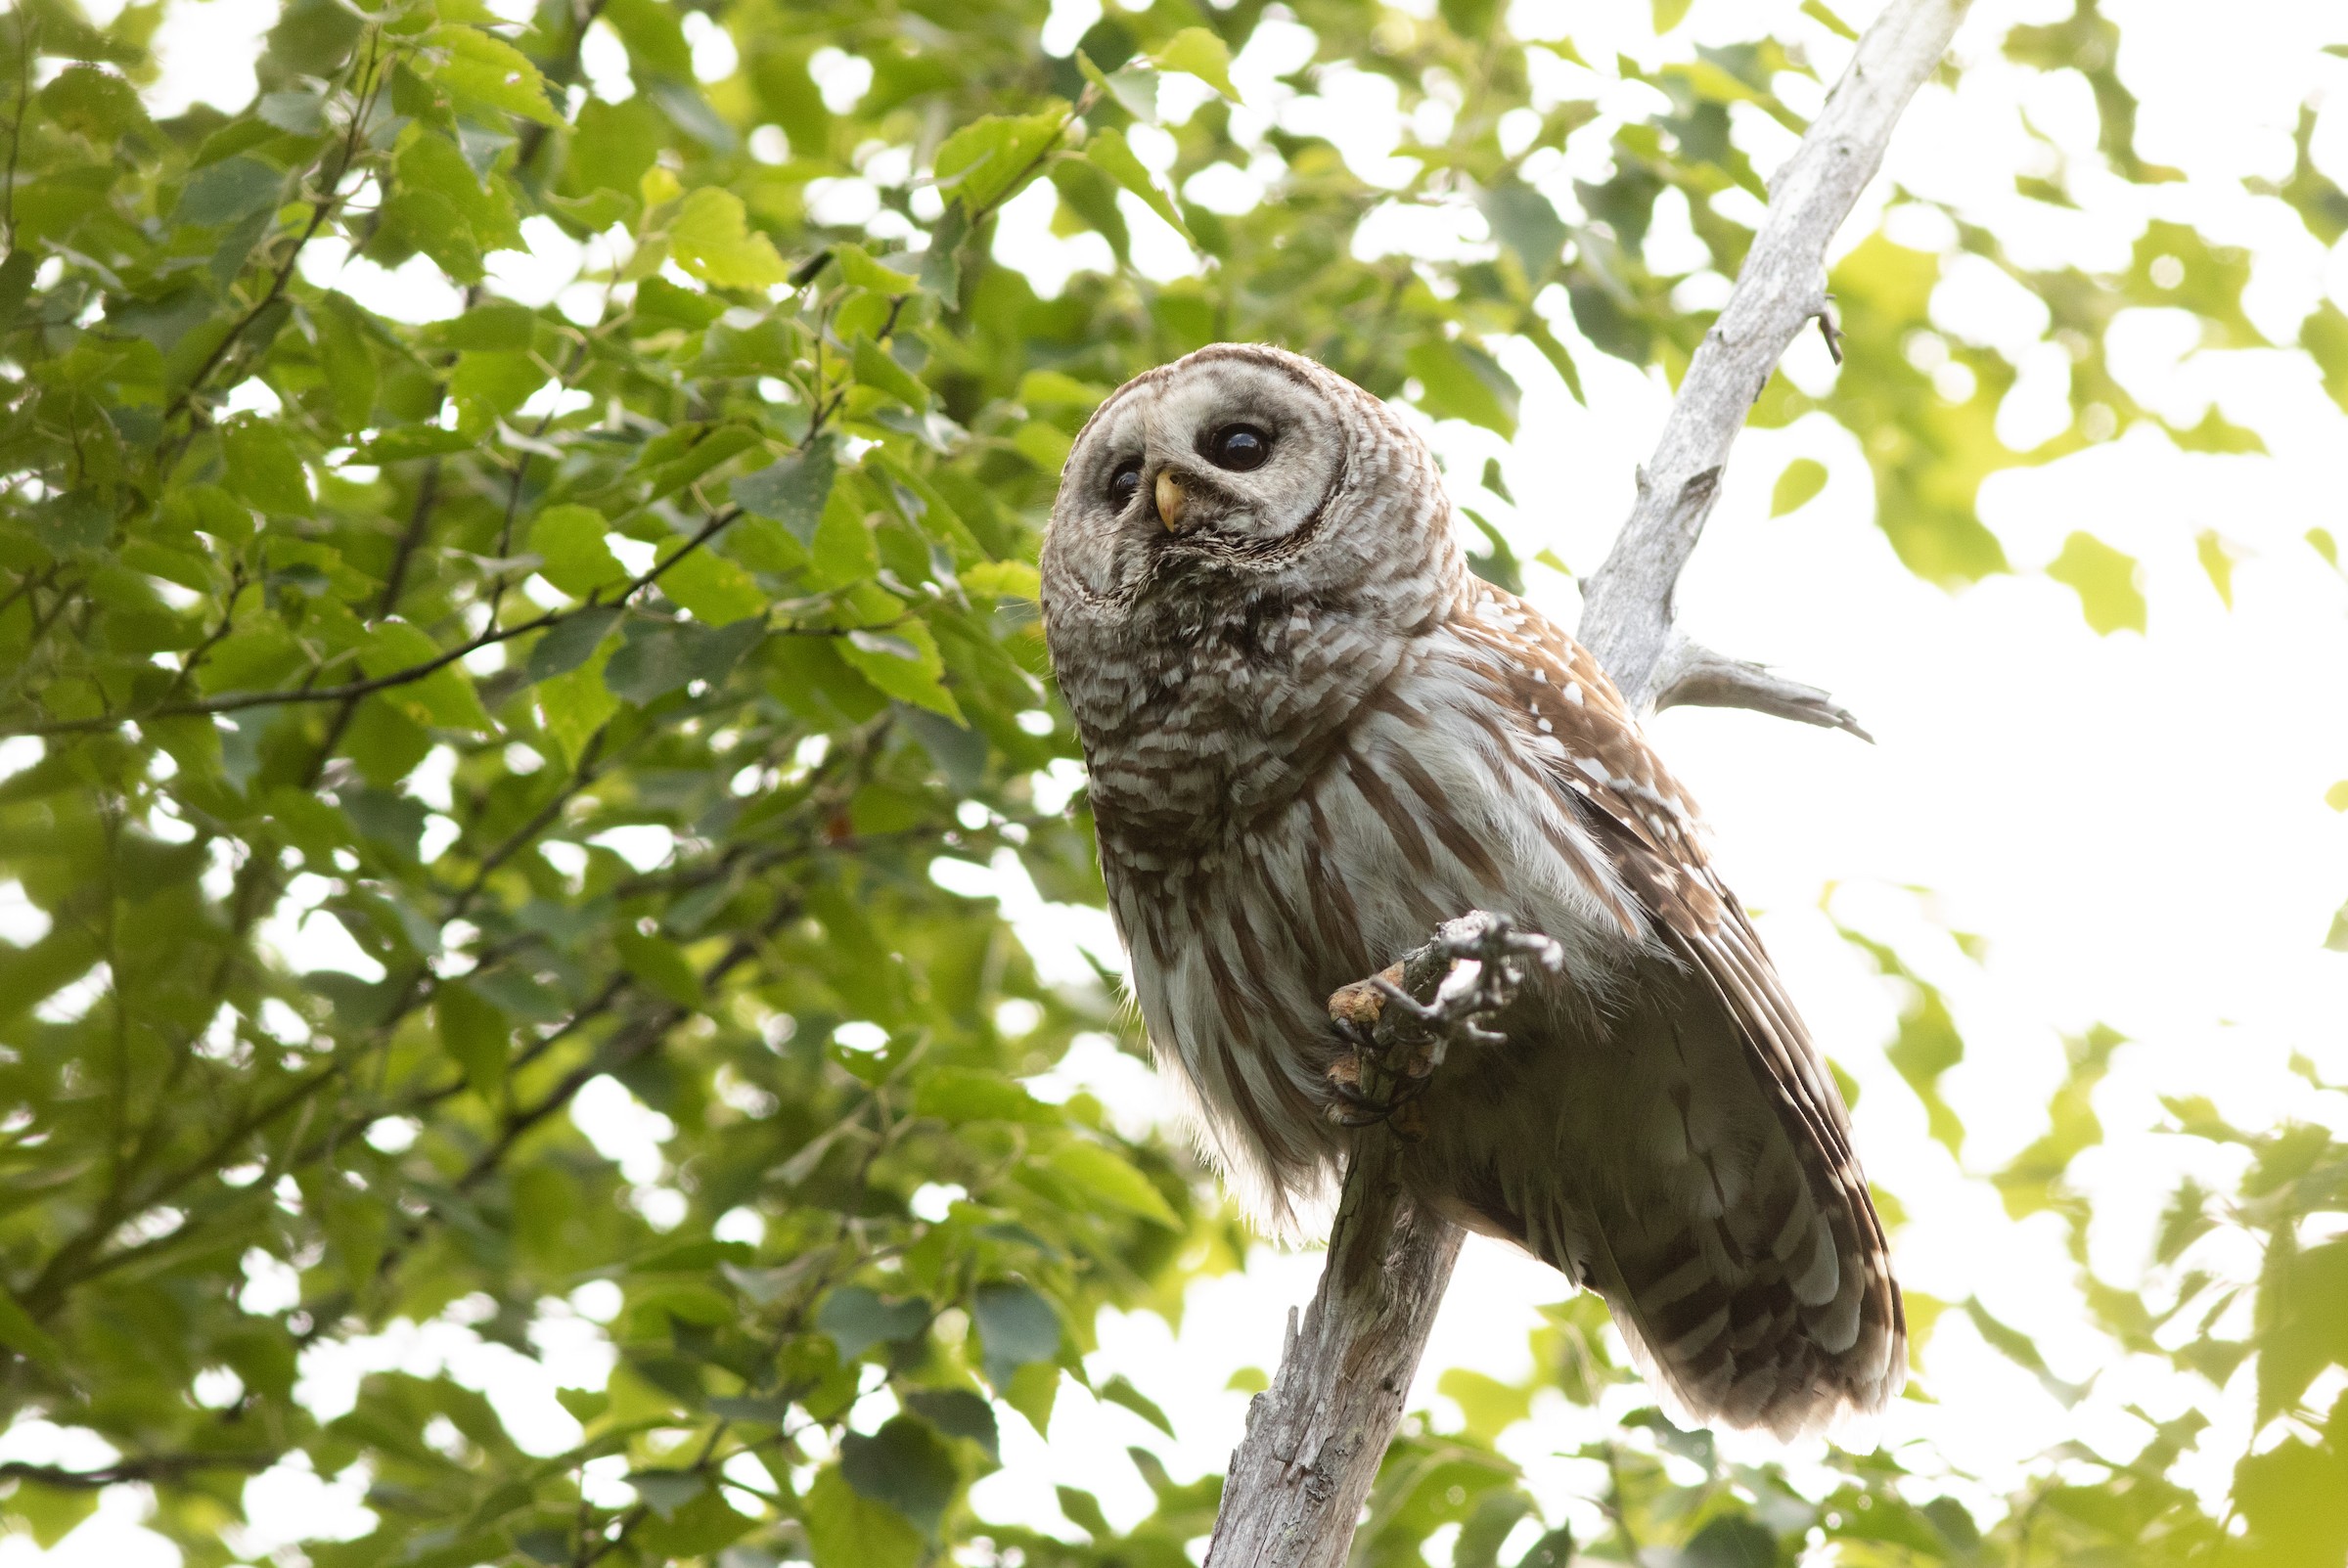 A barred owl with large dark eyes perched on a branch in a tree with bright green leaves.